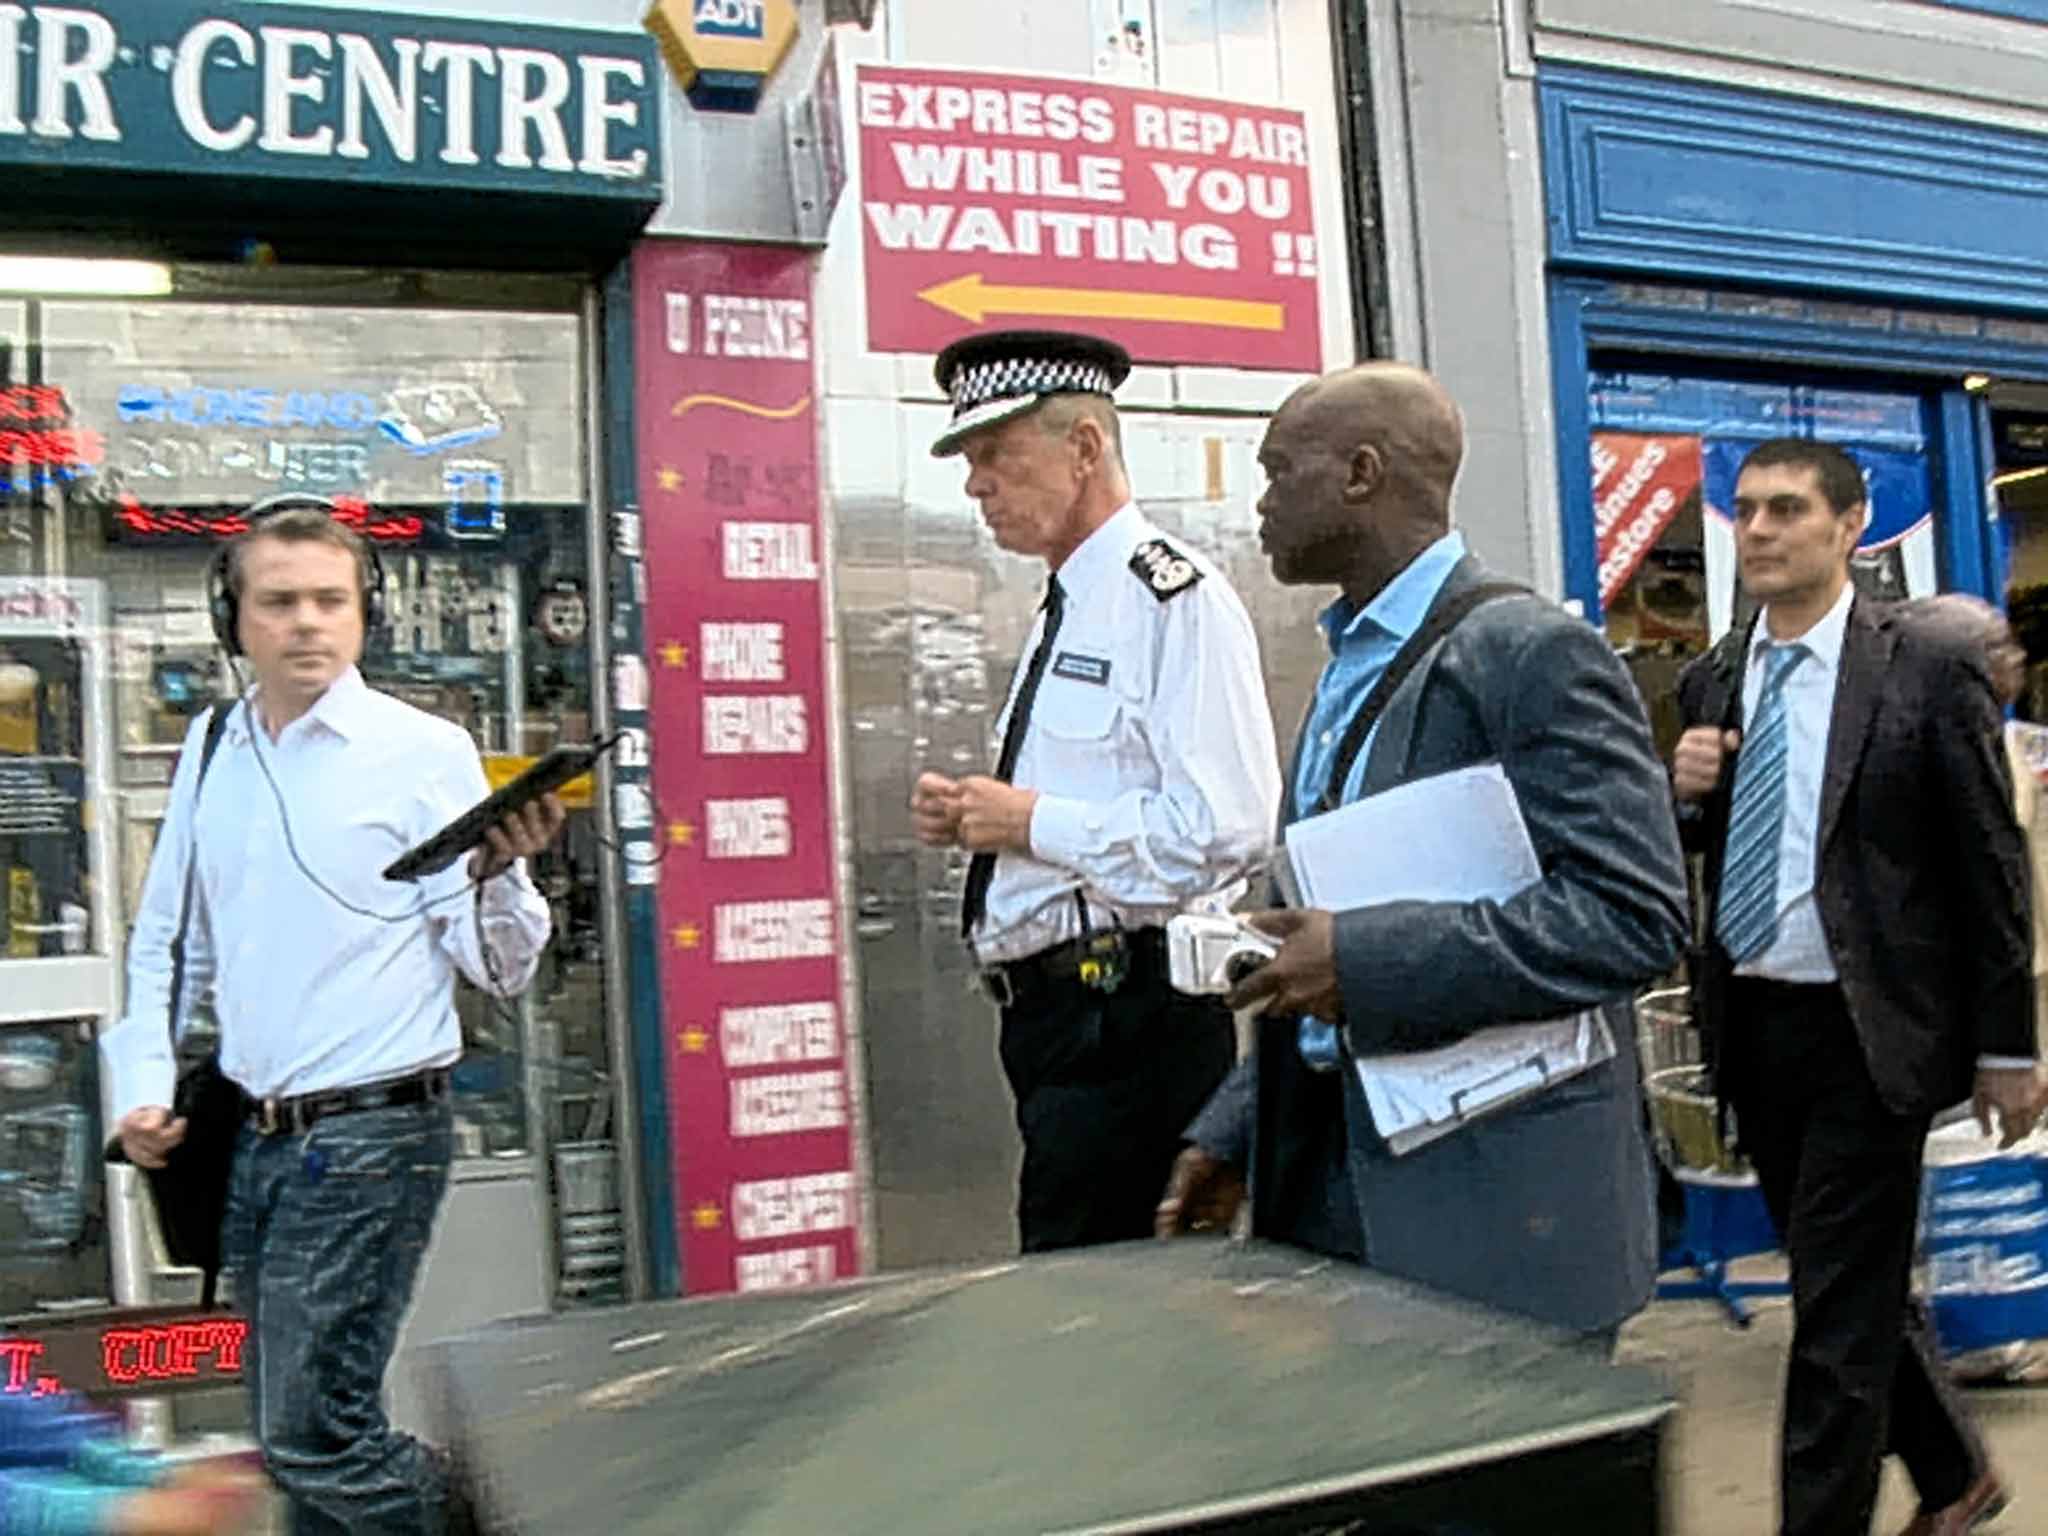 Caught on camera: Sir Bernard Hogan-Howe is called upon to solve a crime in 'The Met'